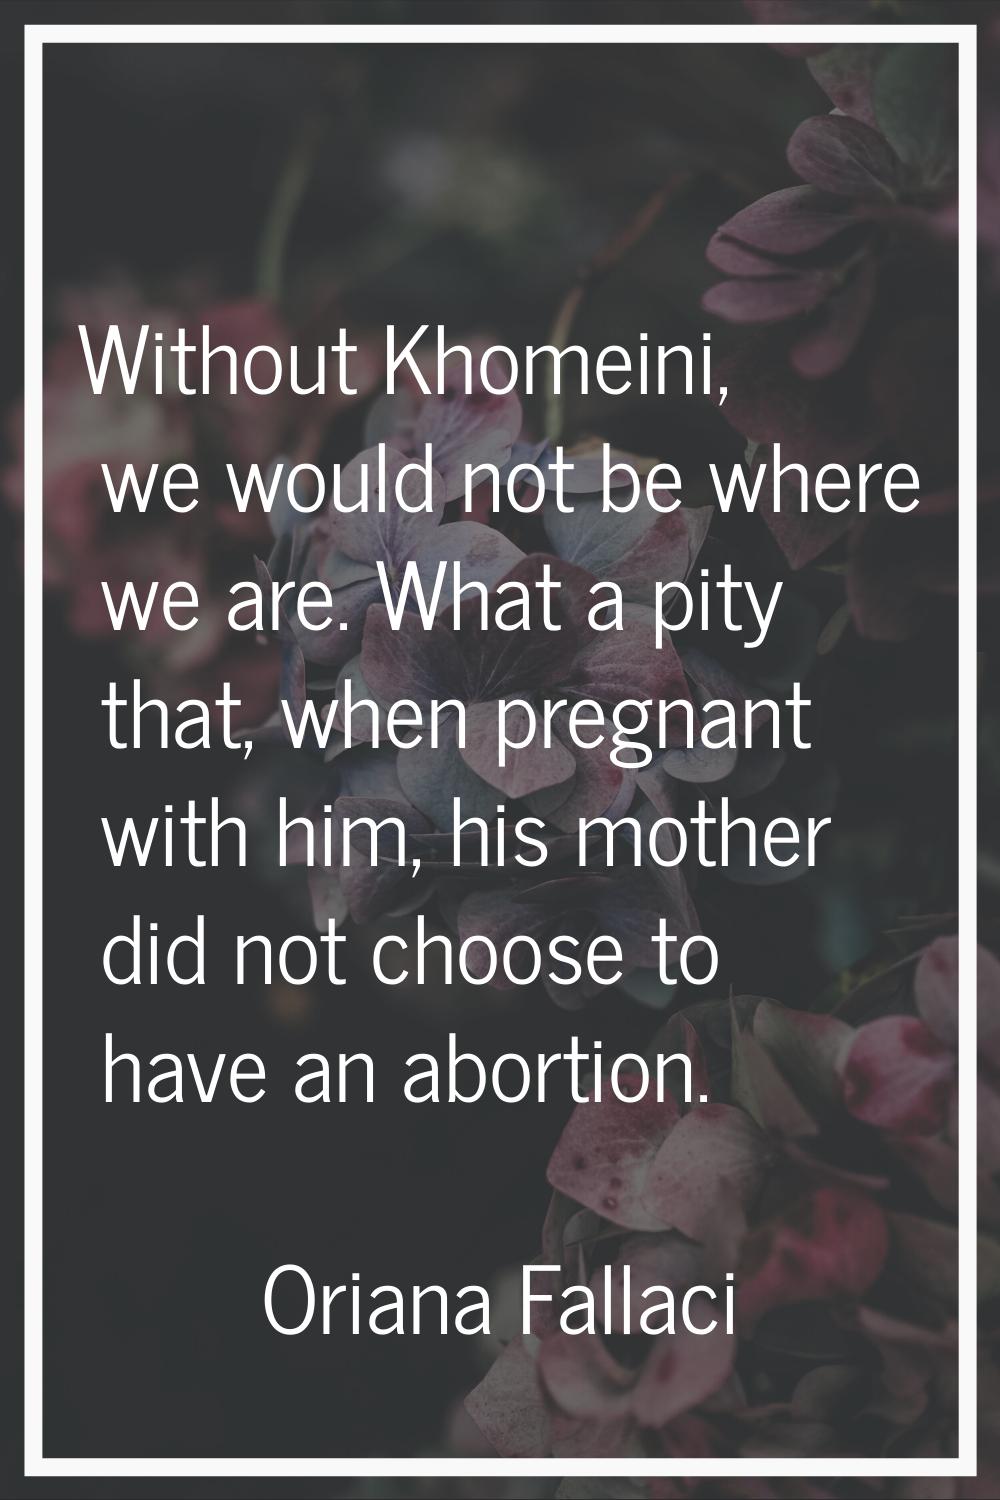 Without Khomeini, we would not be where we are. What a pity that, when pregnant with him, his mothe